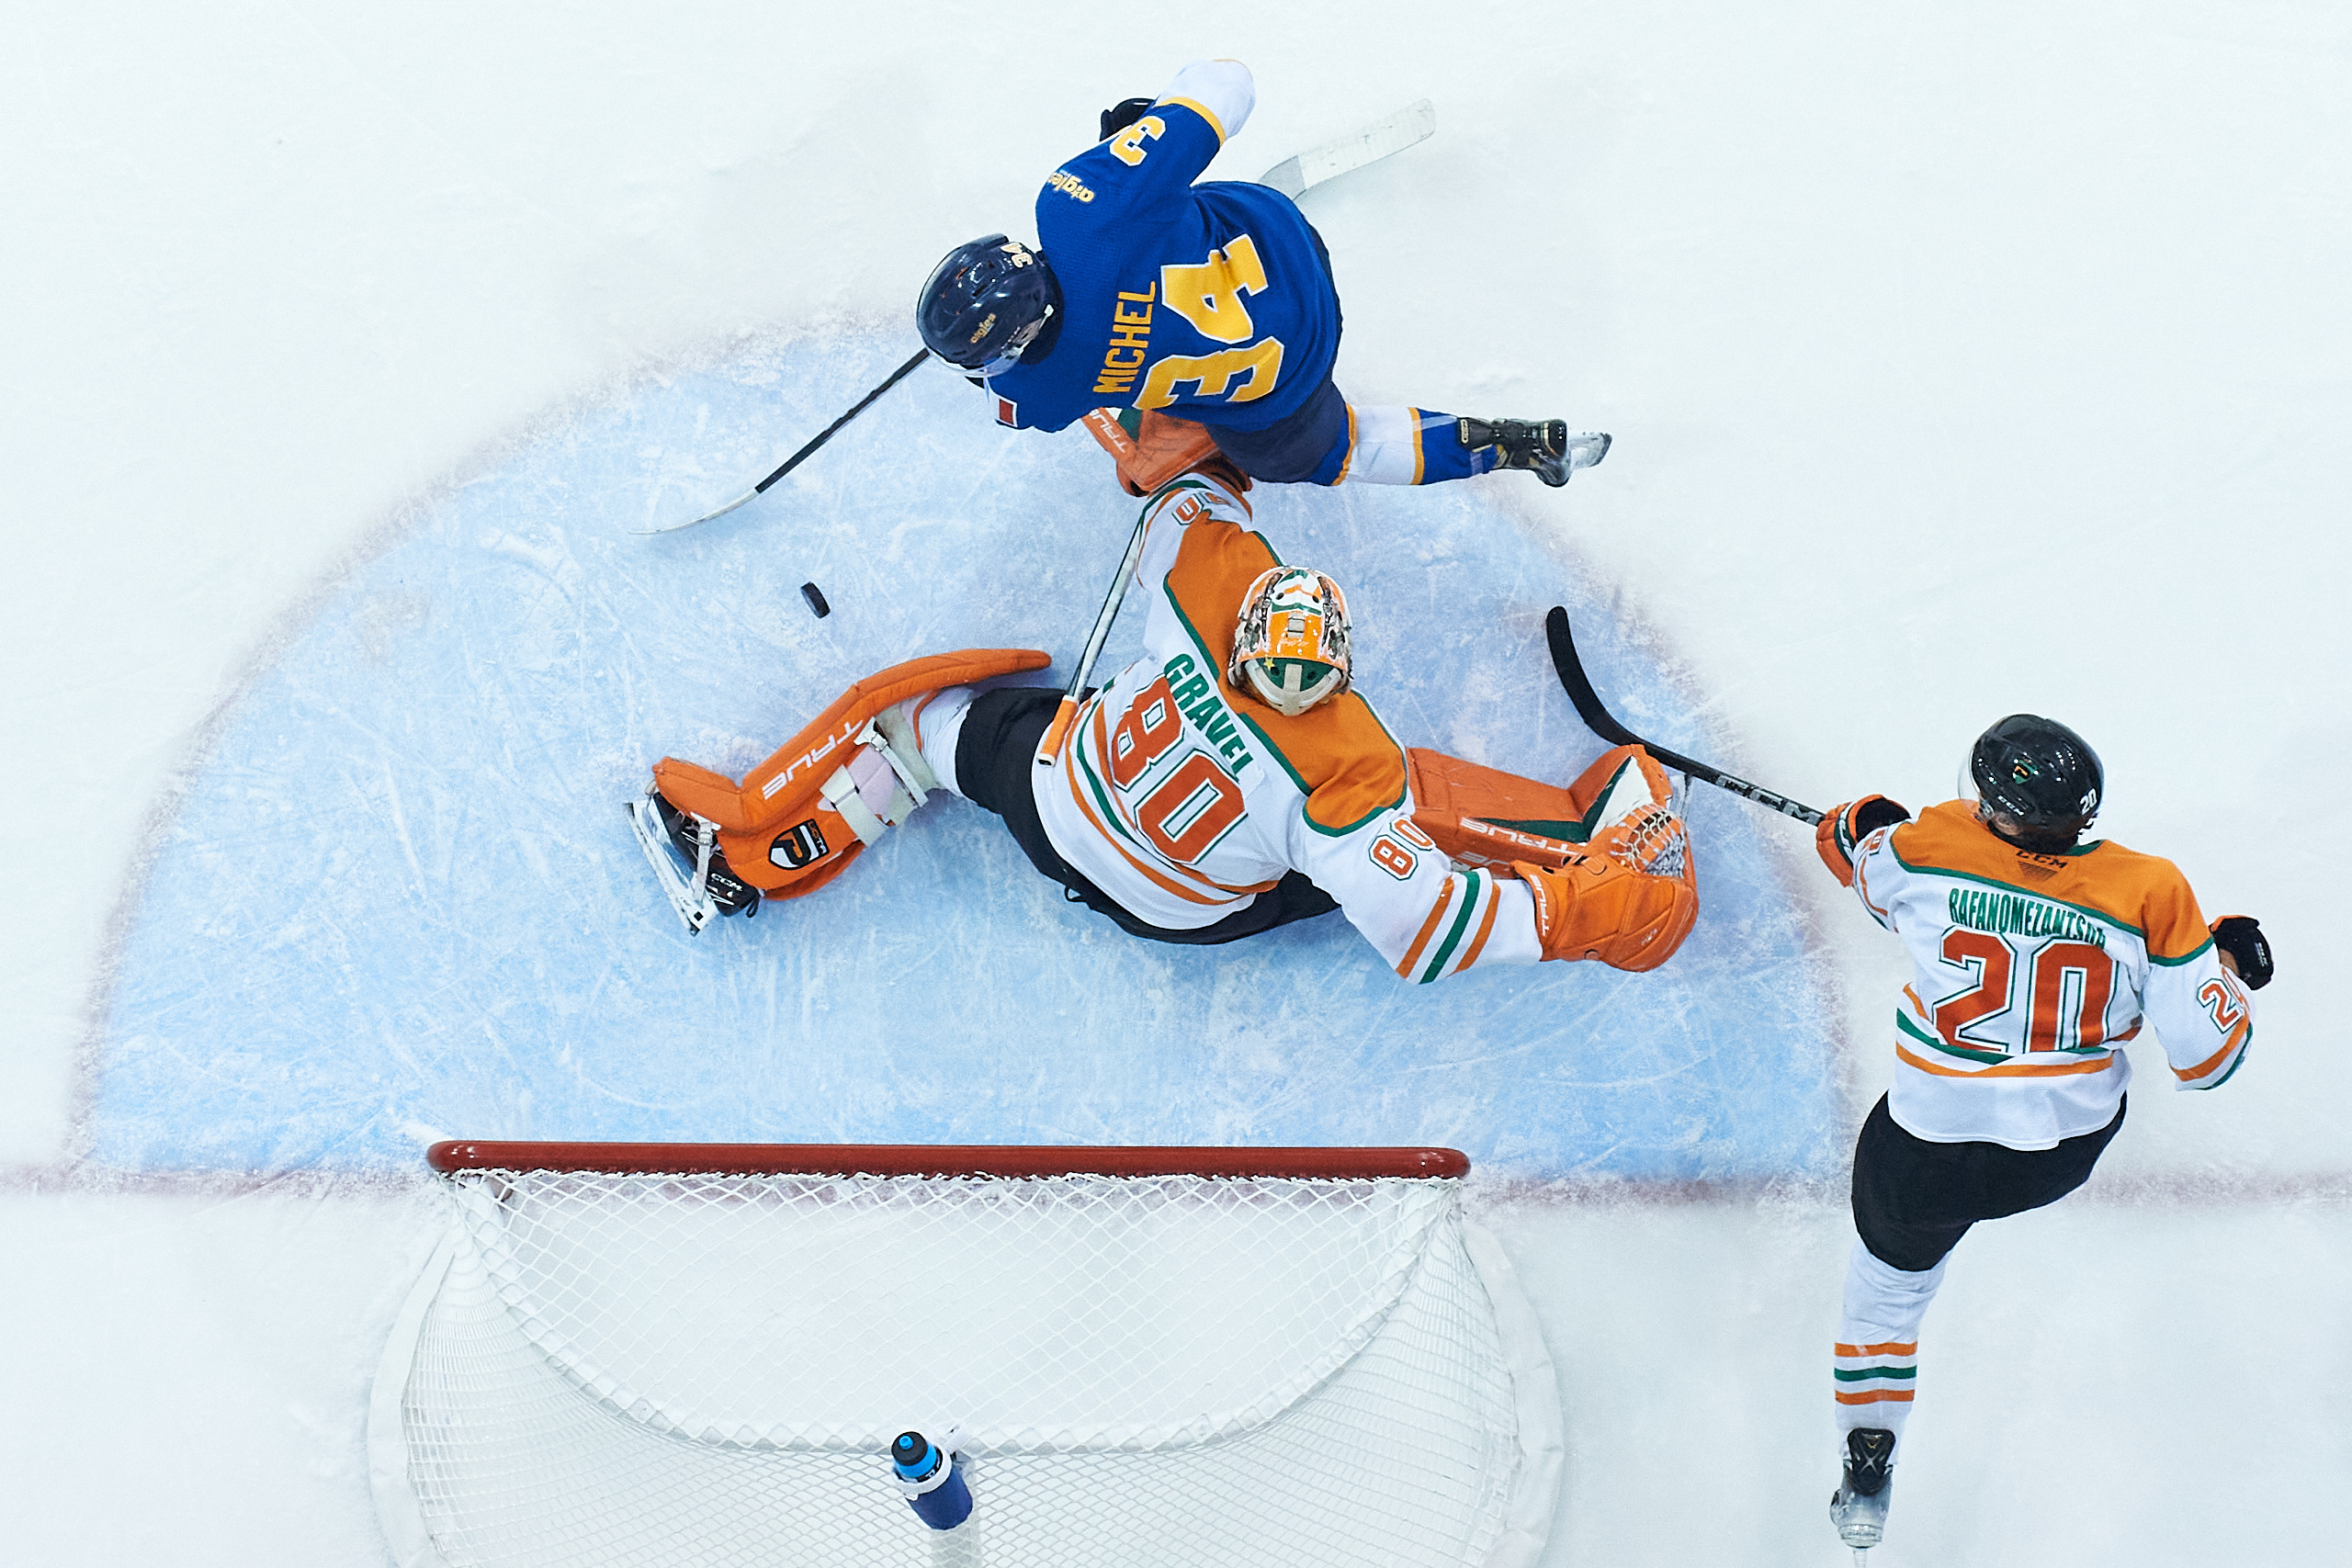 An overhead shot of UQTR goaltender stopping a close from a Moncton player